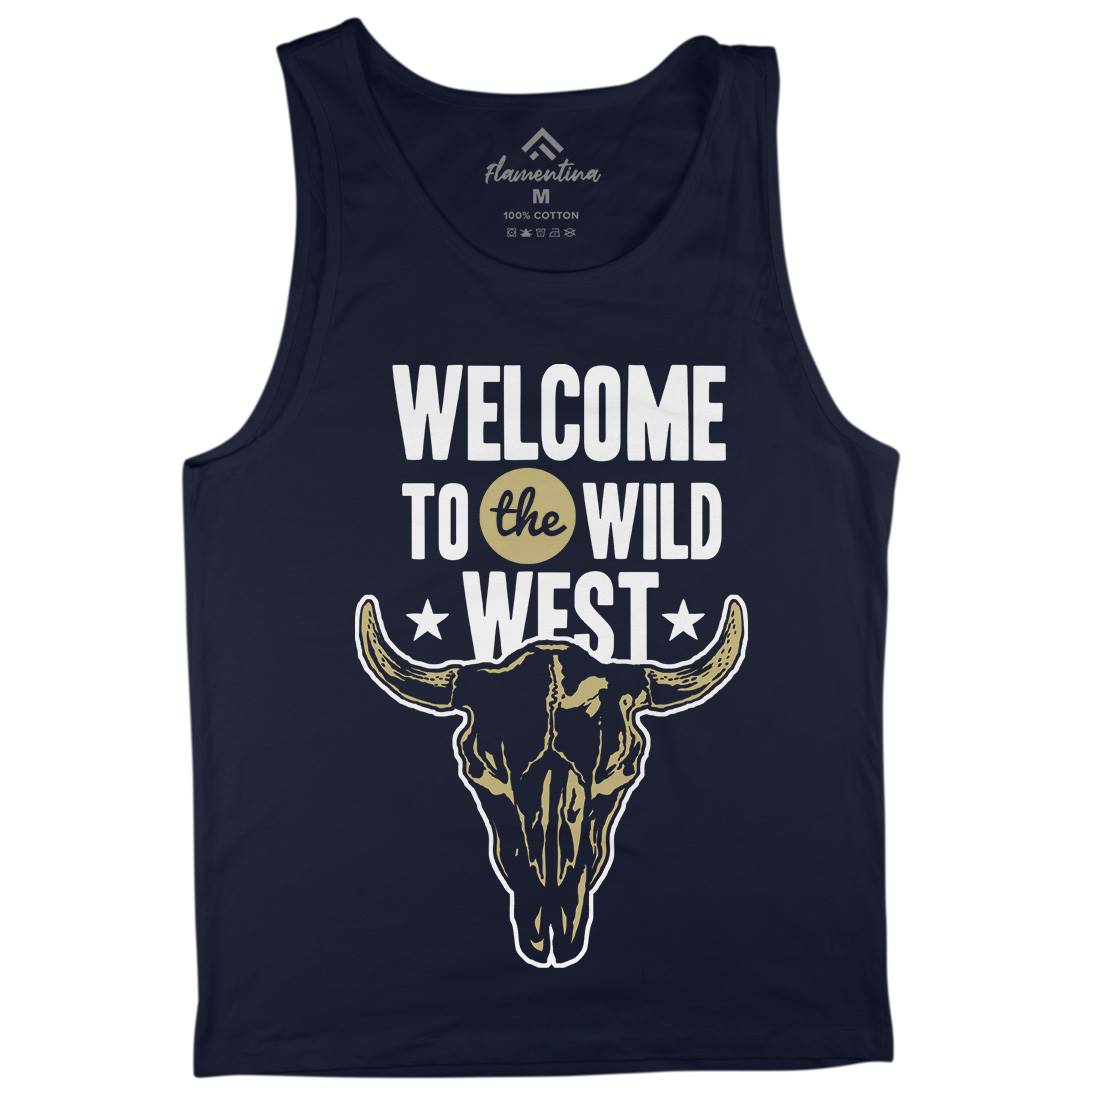 Welcome To The Wild West Mens Tank Top Vest American A393